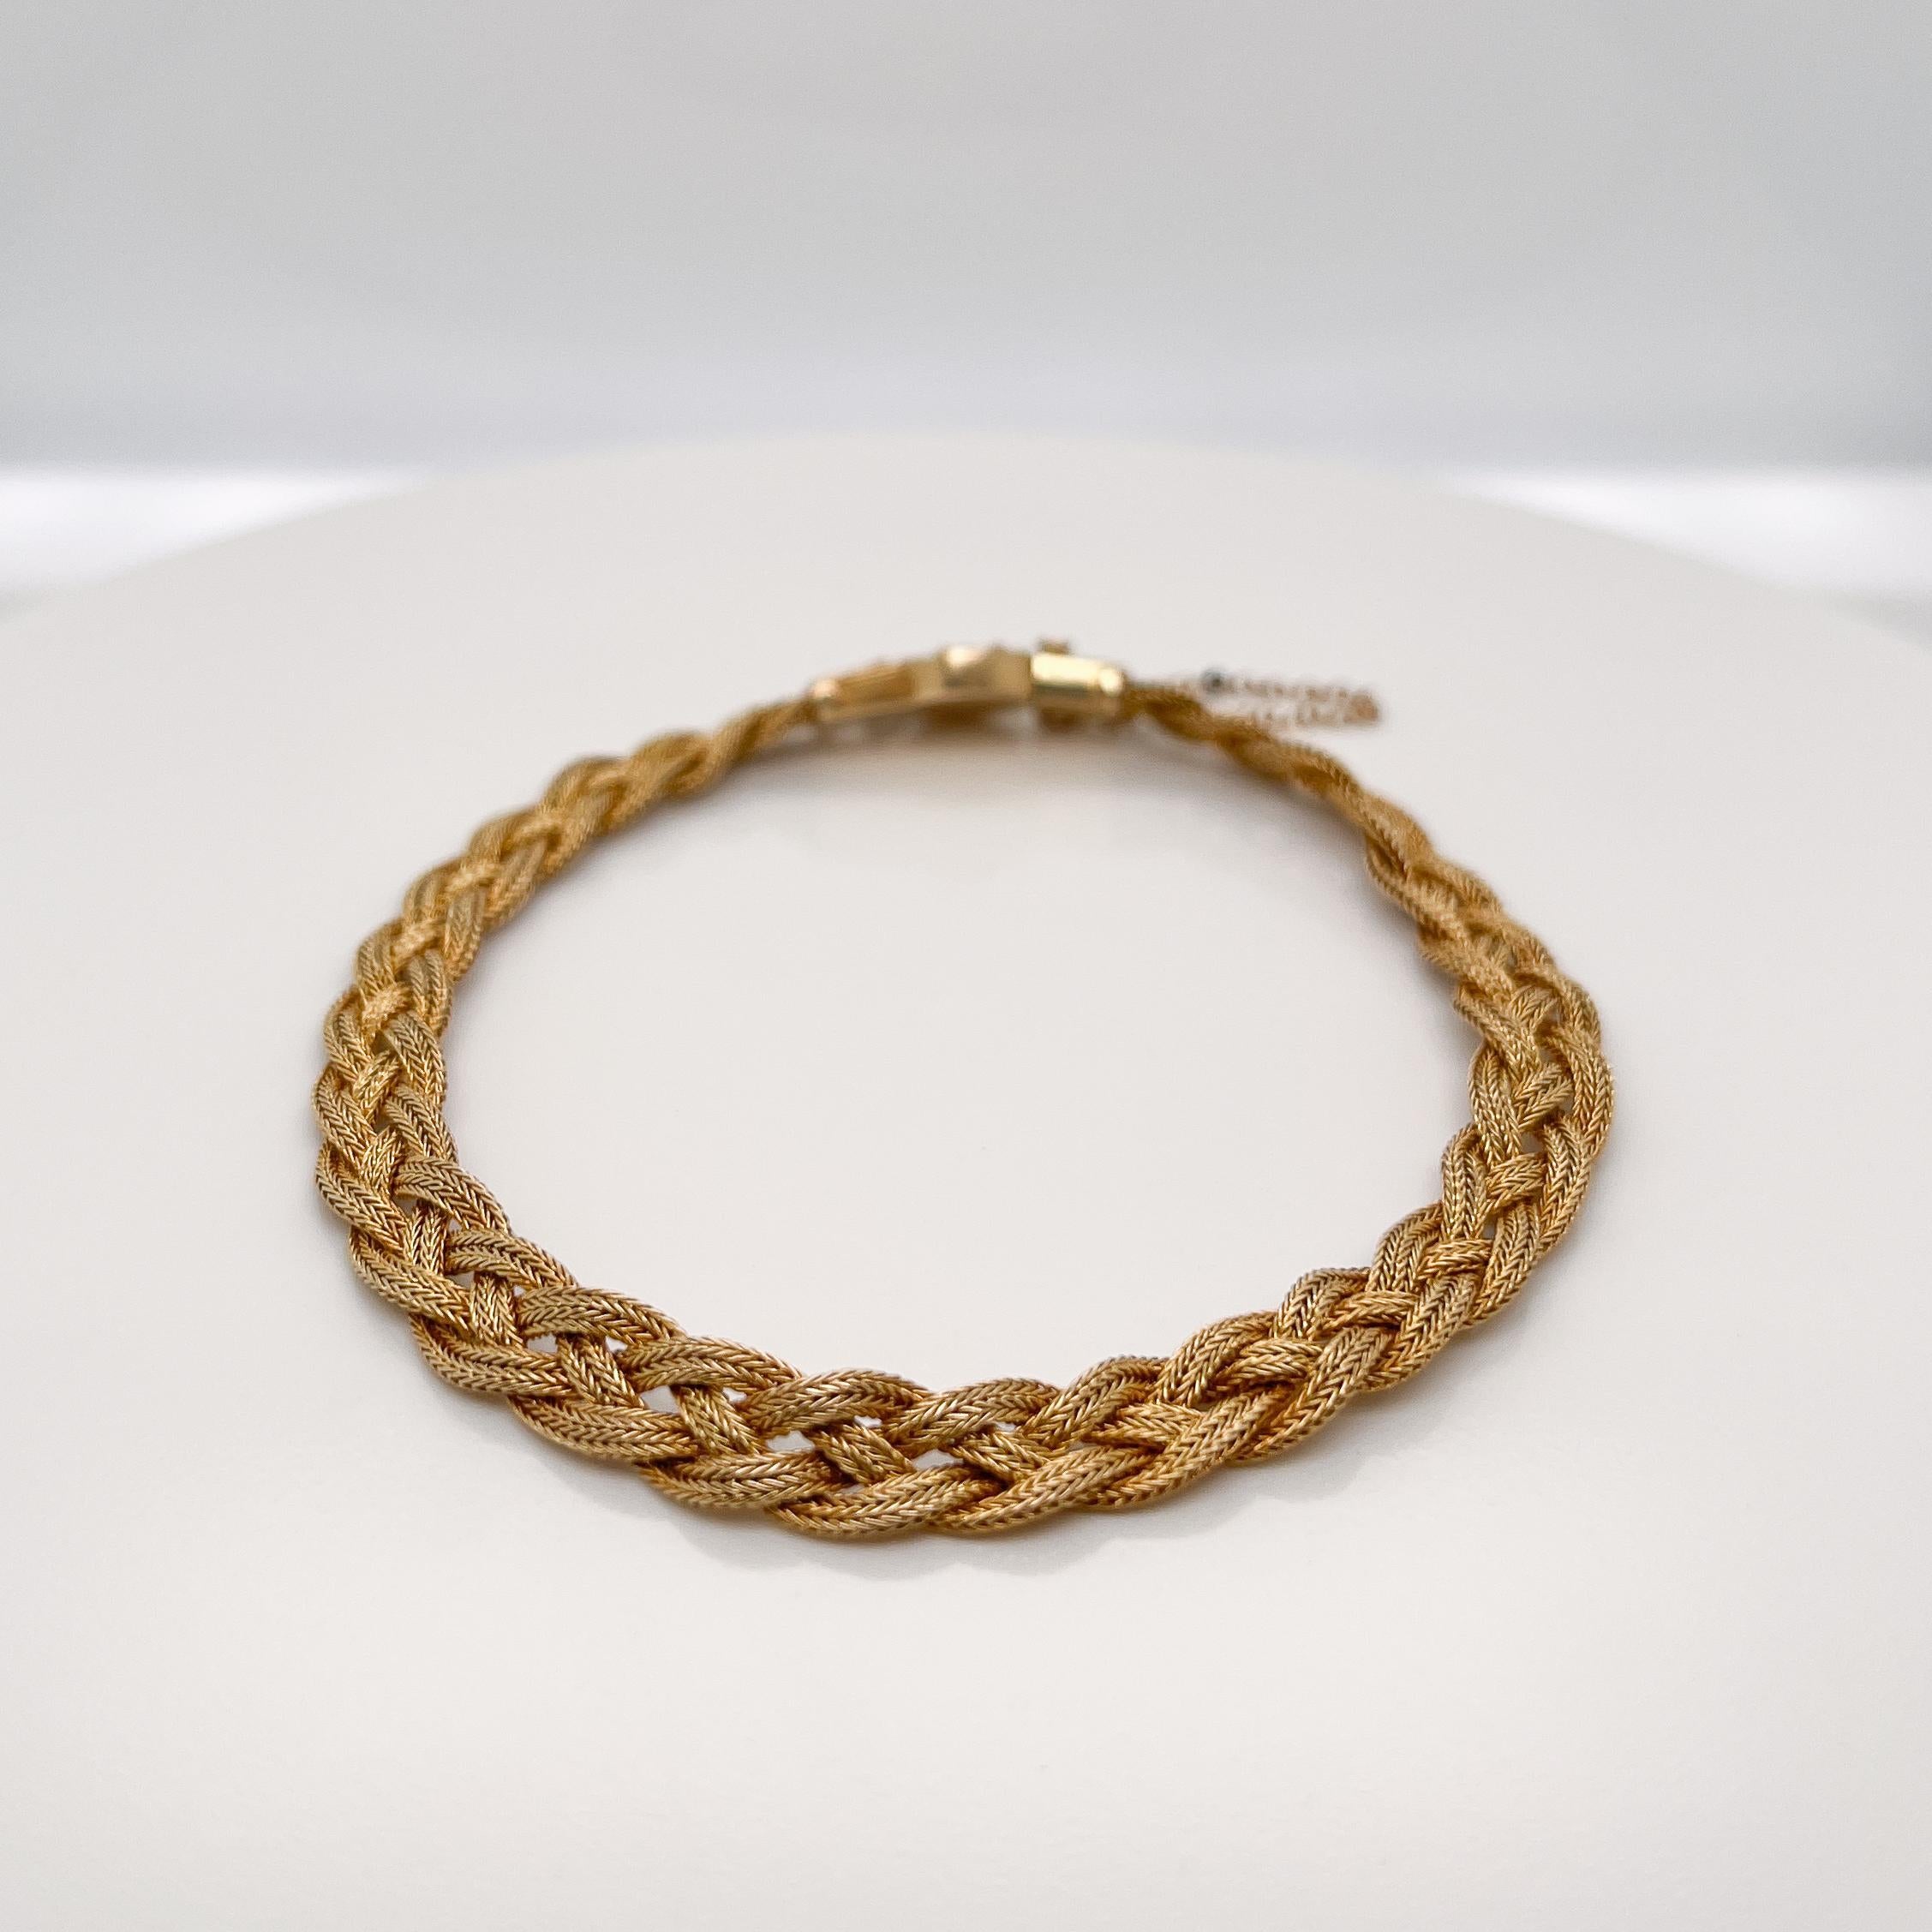 A very fine 14k gold Etruscan style bracelet.

With three delicate strands of woven braided gold wire terminating in an Etruscan style box clasp with granulated and wire work decoration. 

Set with a safety chain.

Simply a finely-made Etruscan